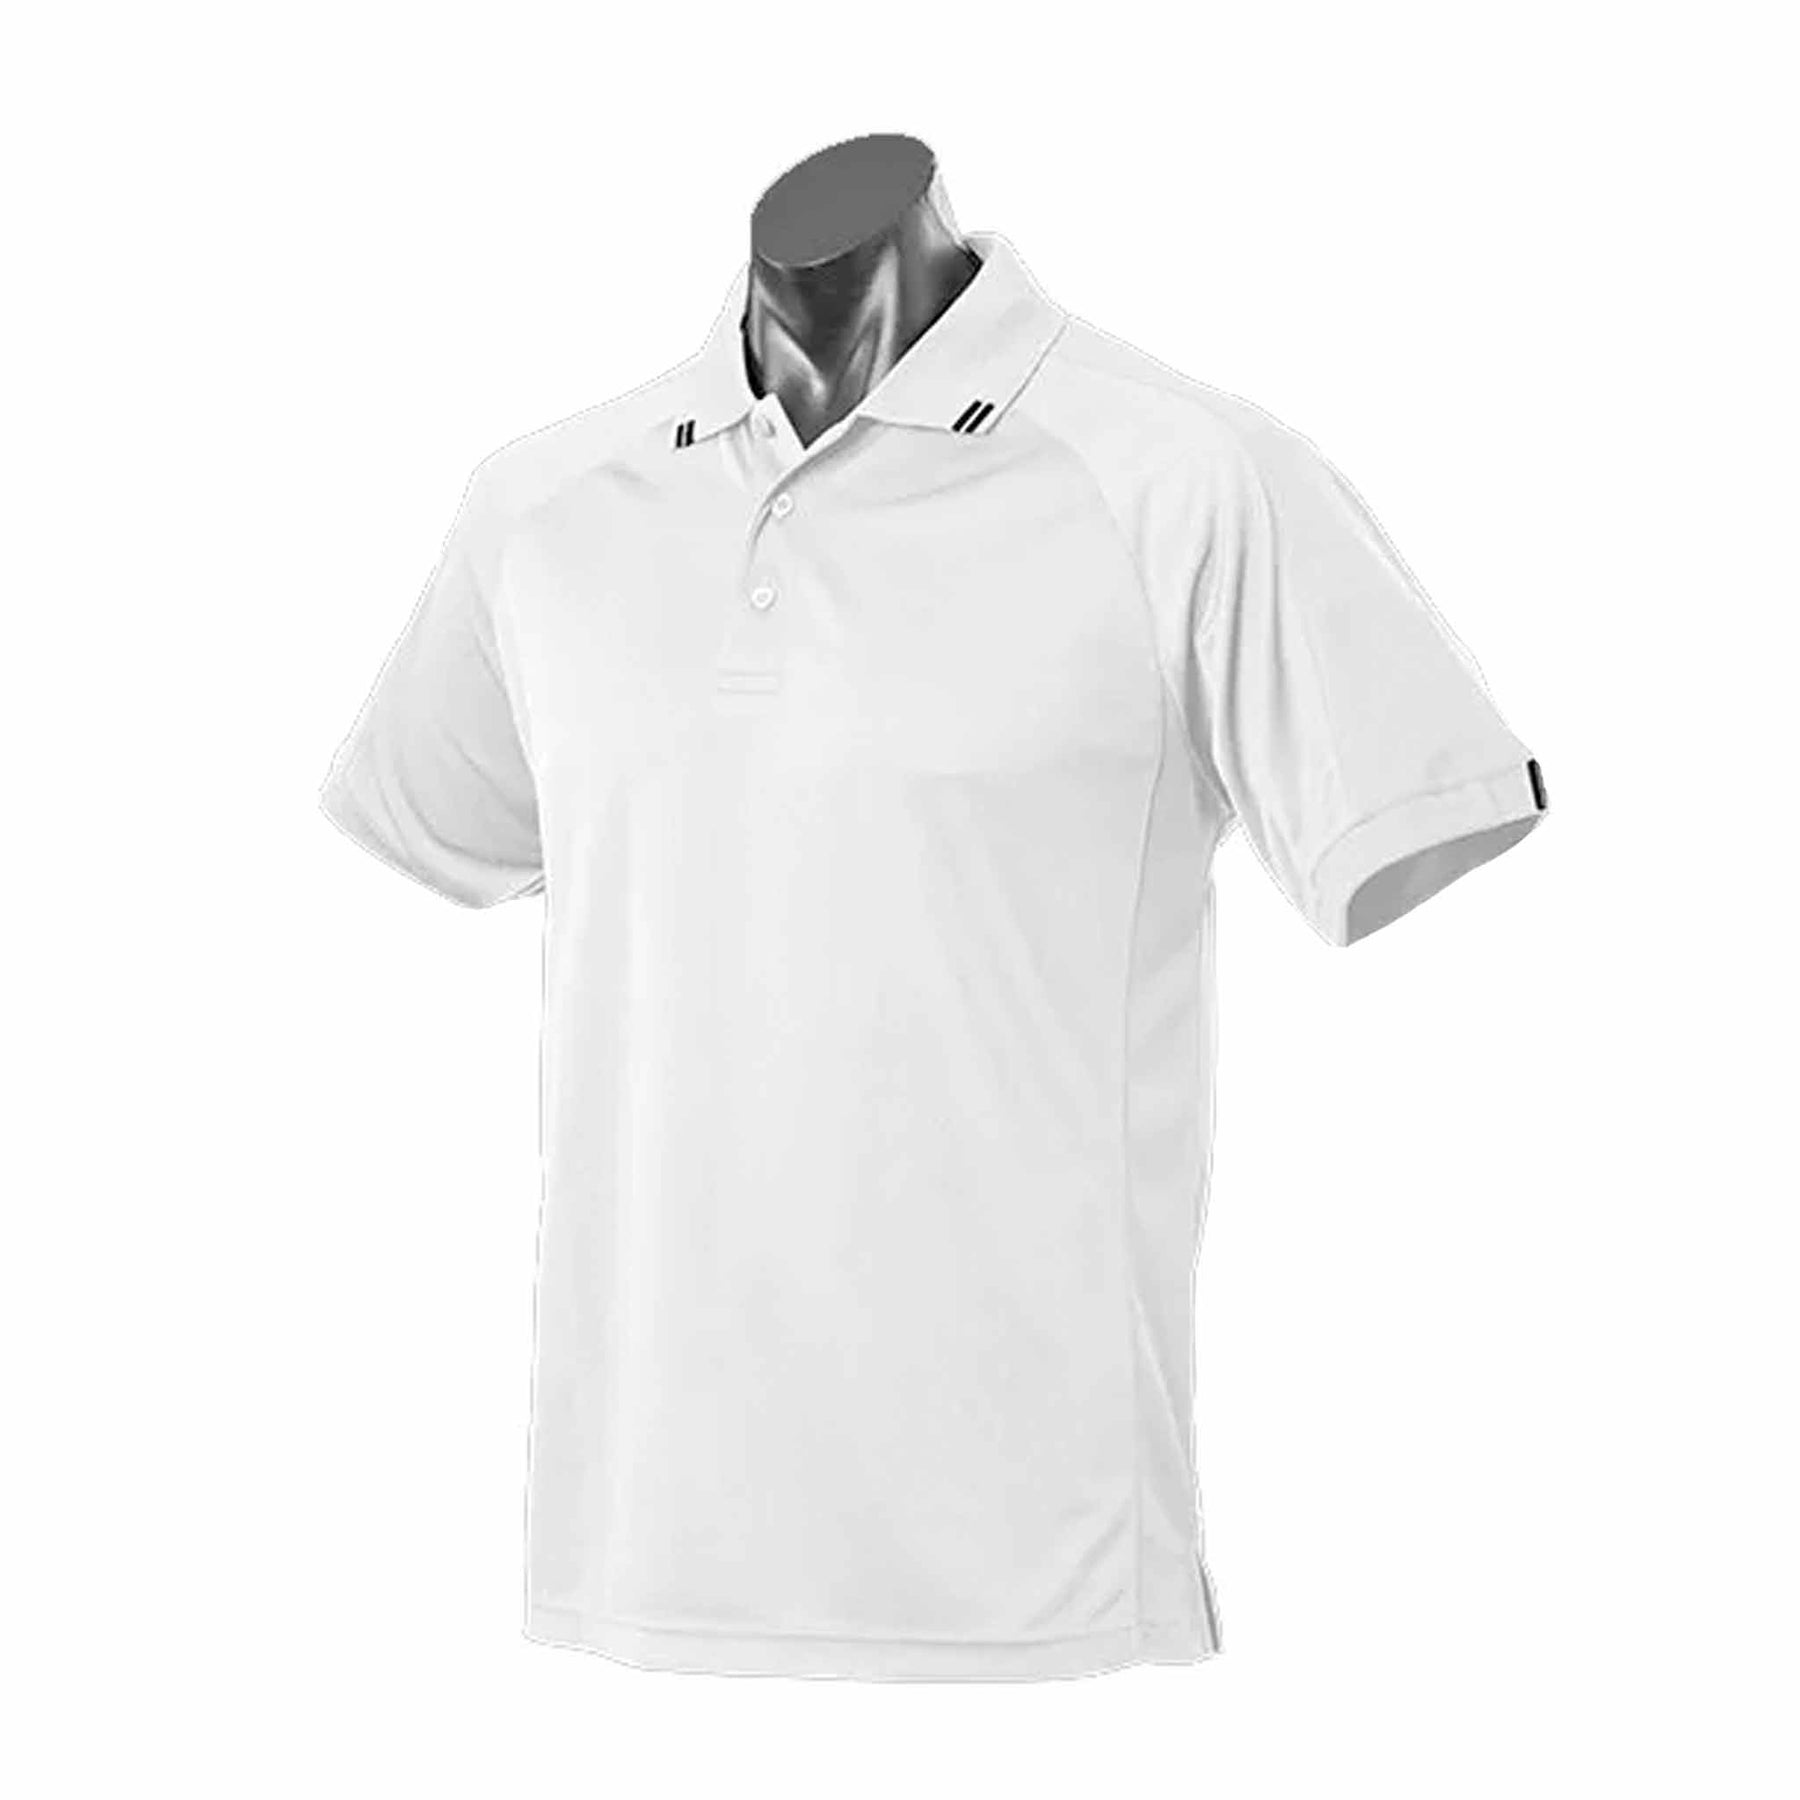 aussie pacific flinders polo in white black